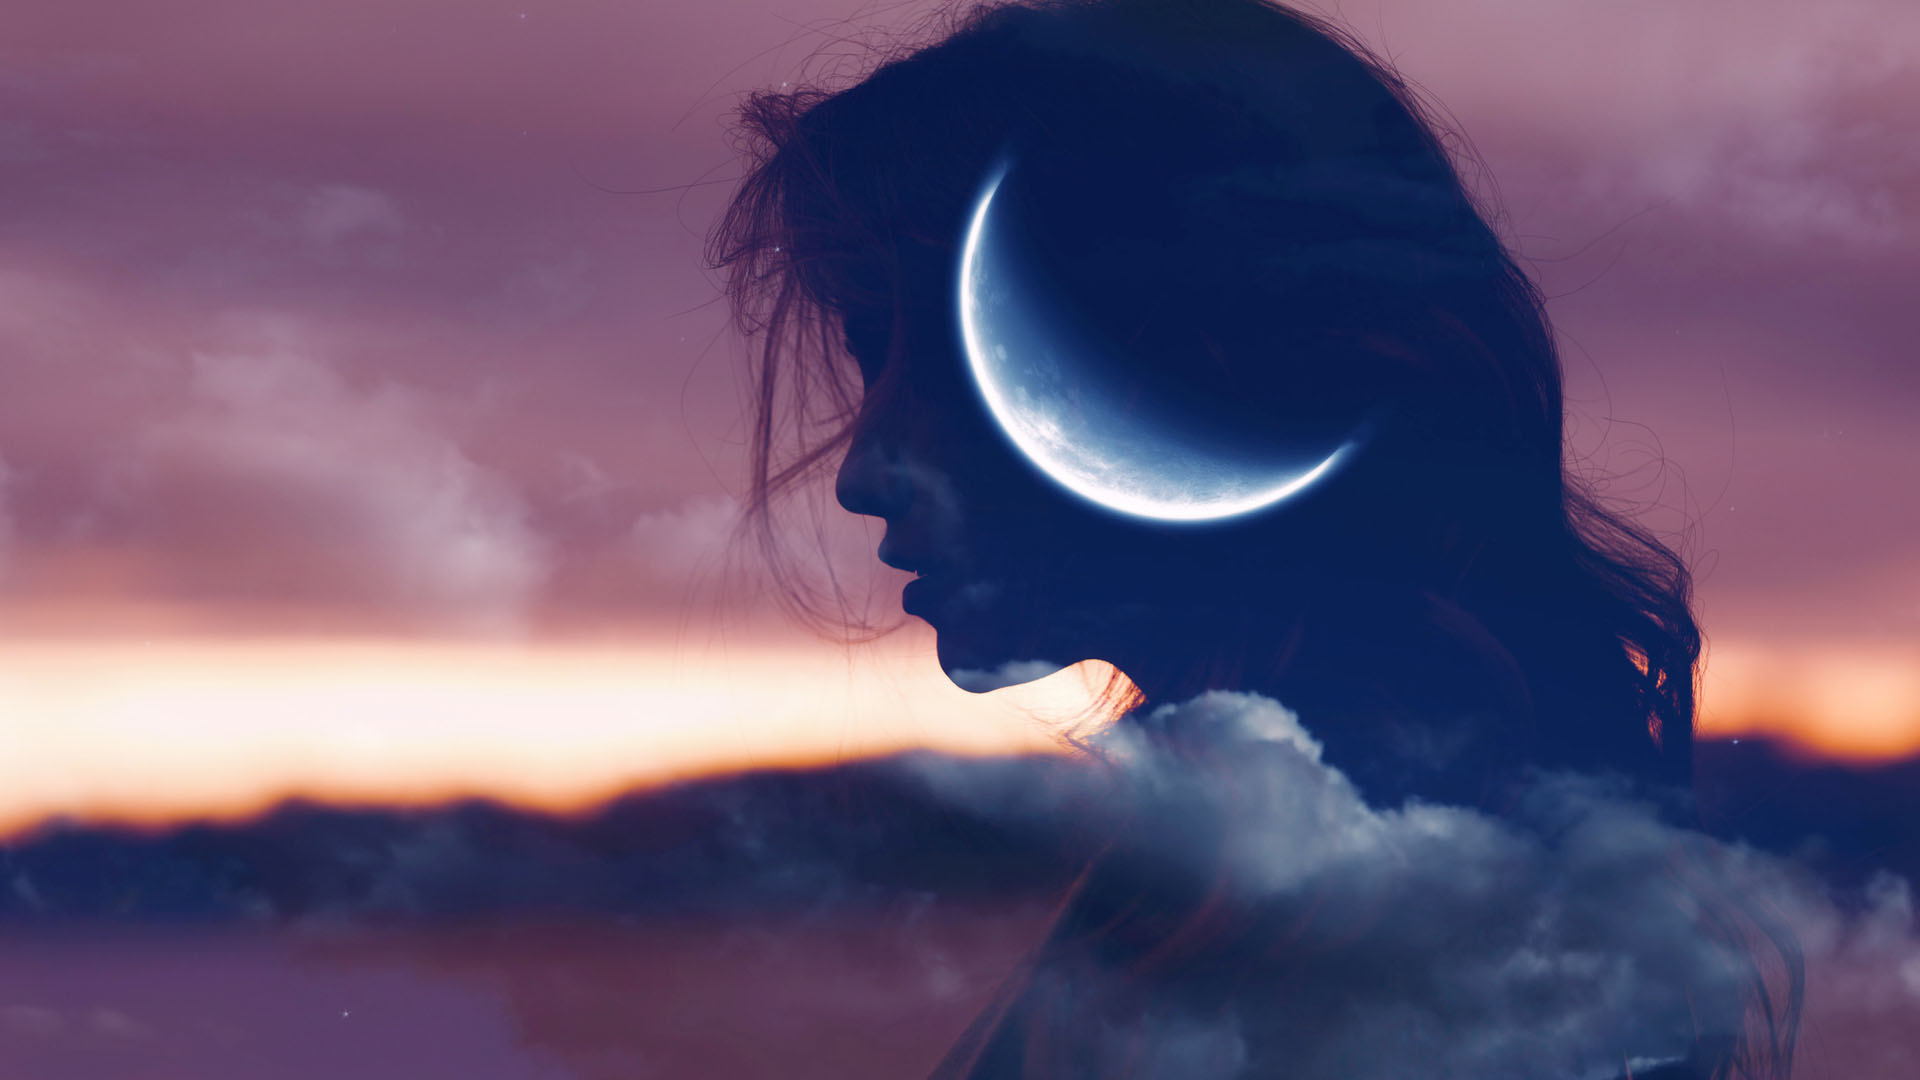 Does the moon affect menstrual cycles?